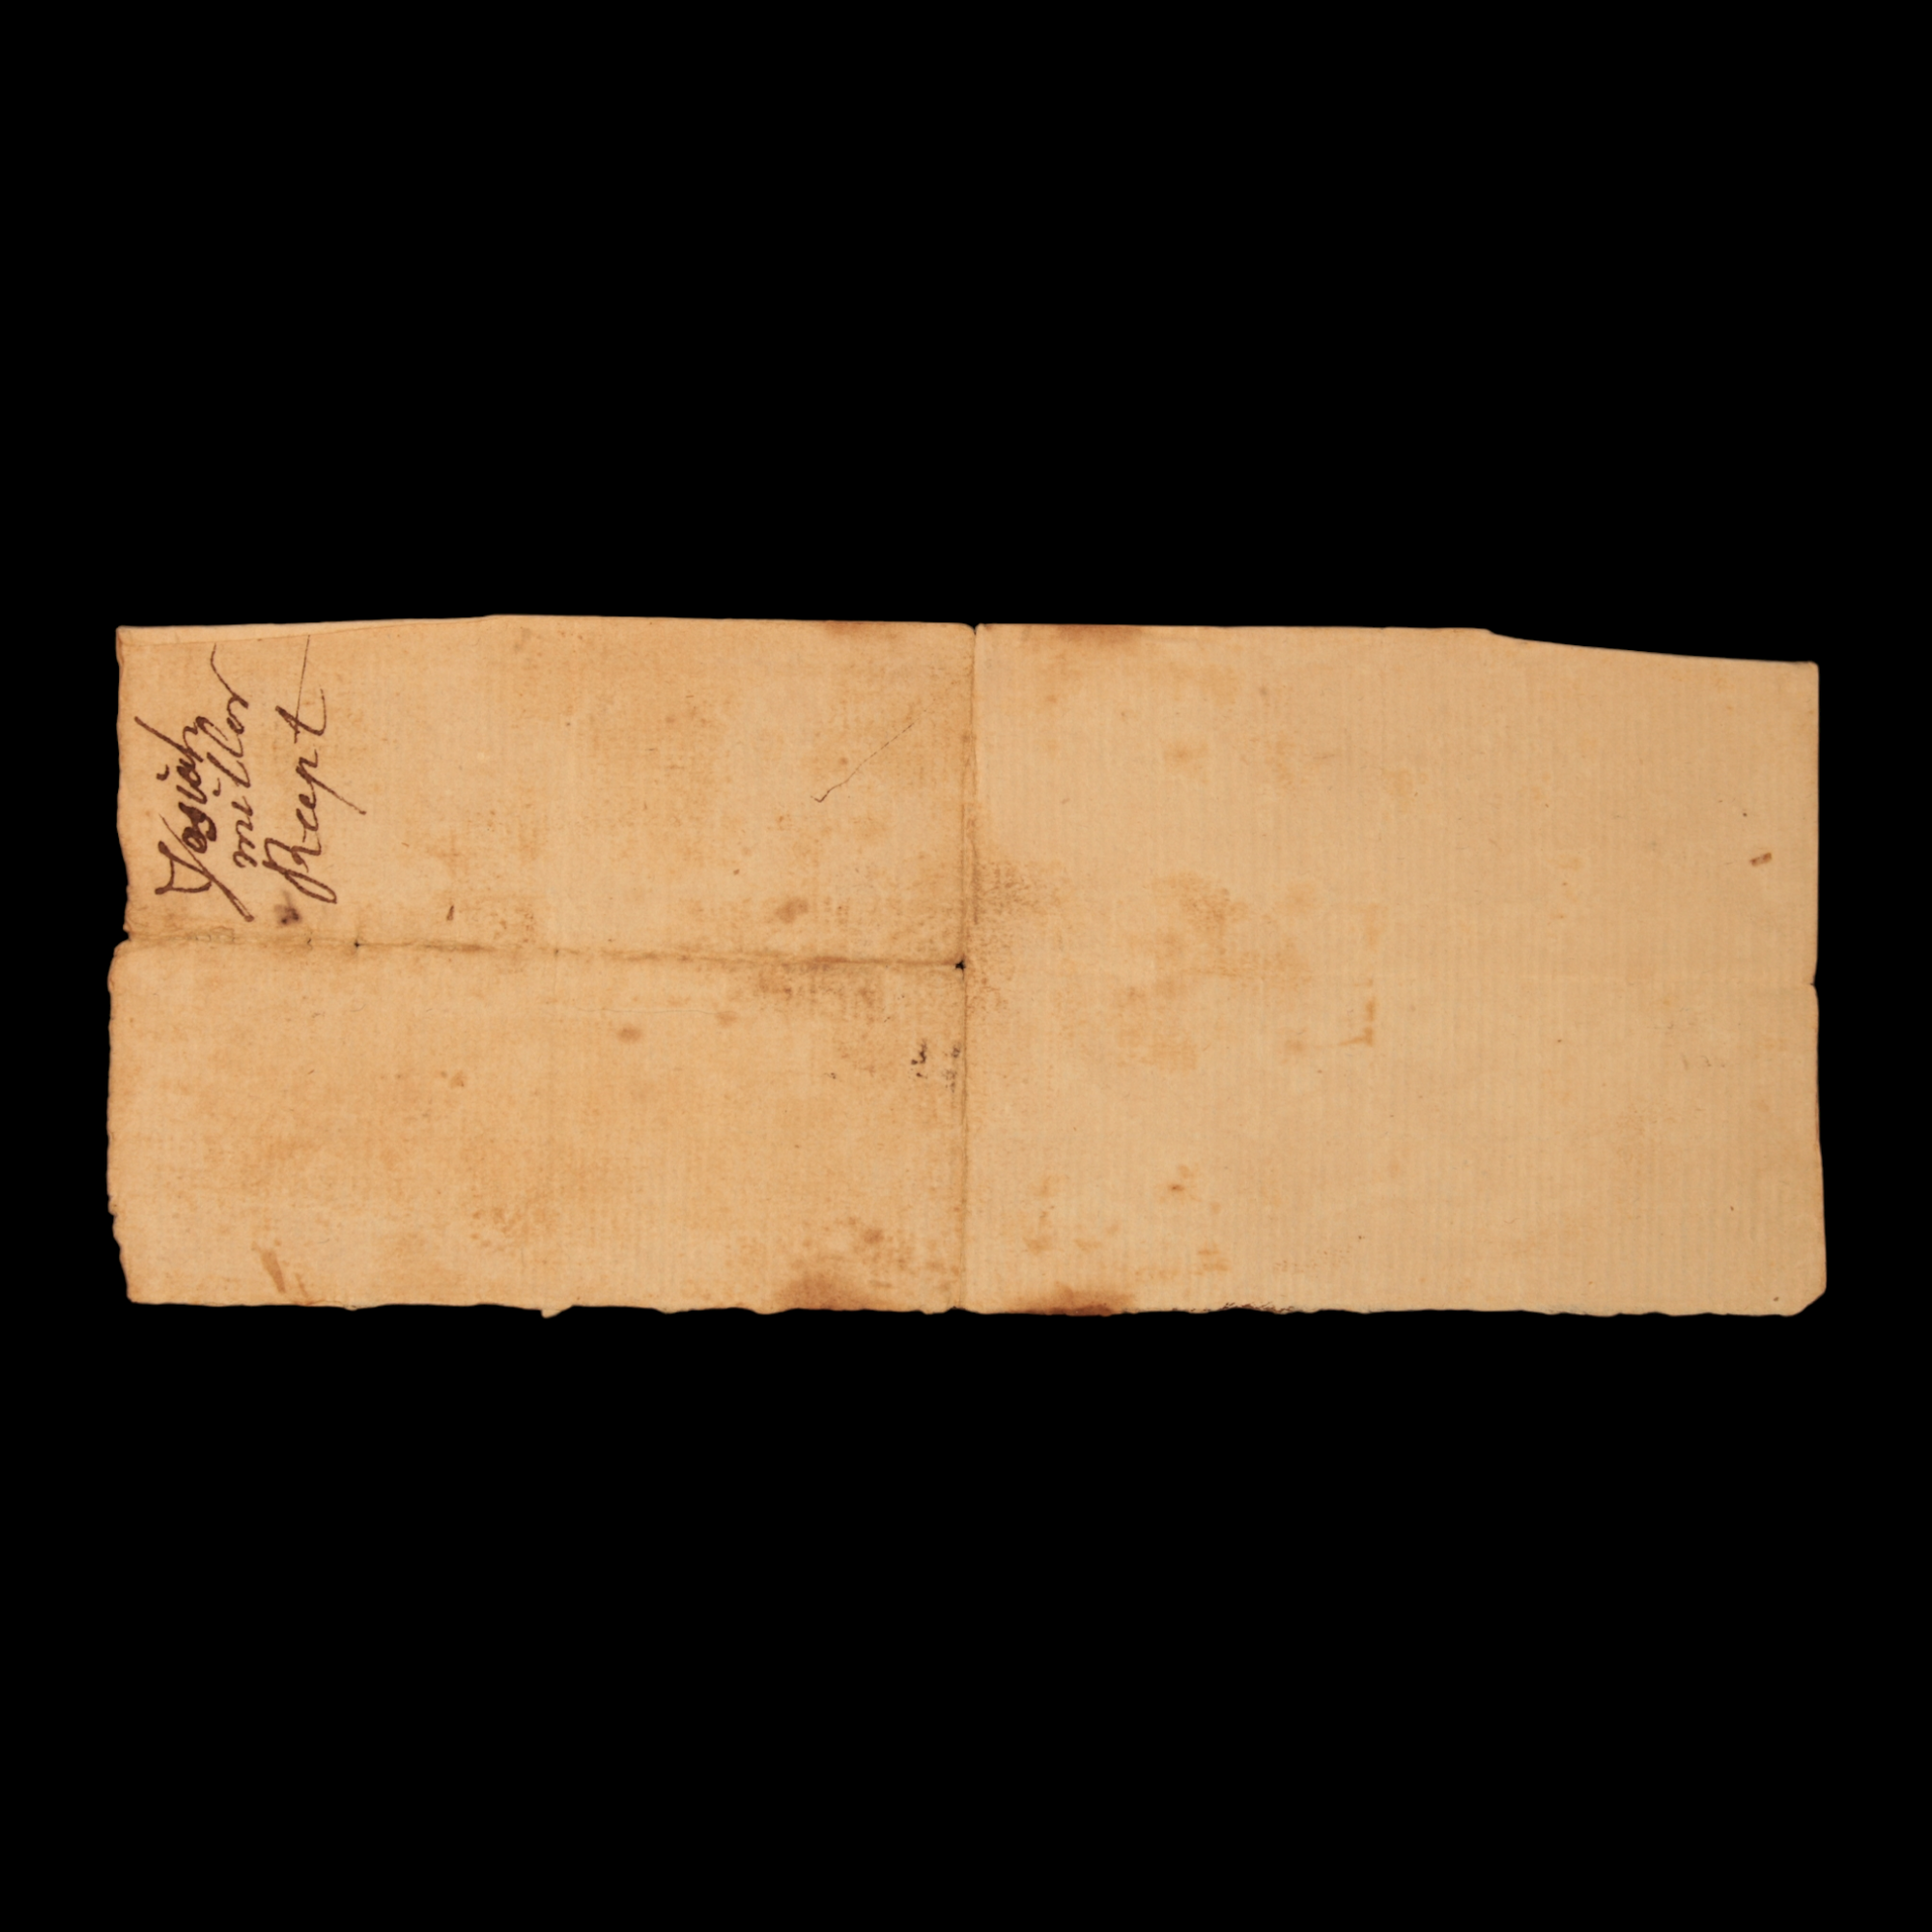 Construction Receipt, Providence, Rhode Island - 1781 - United States - 5/10/23 Auction